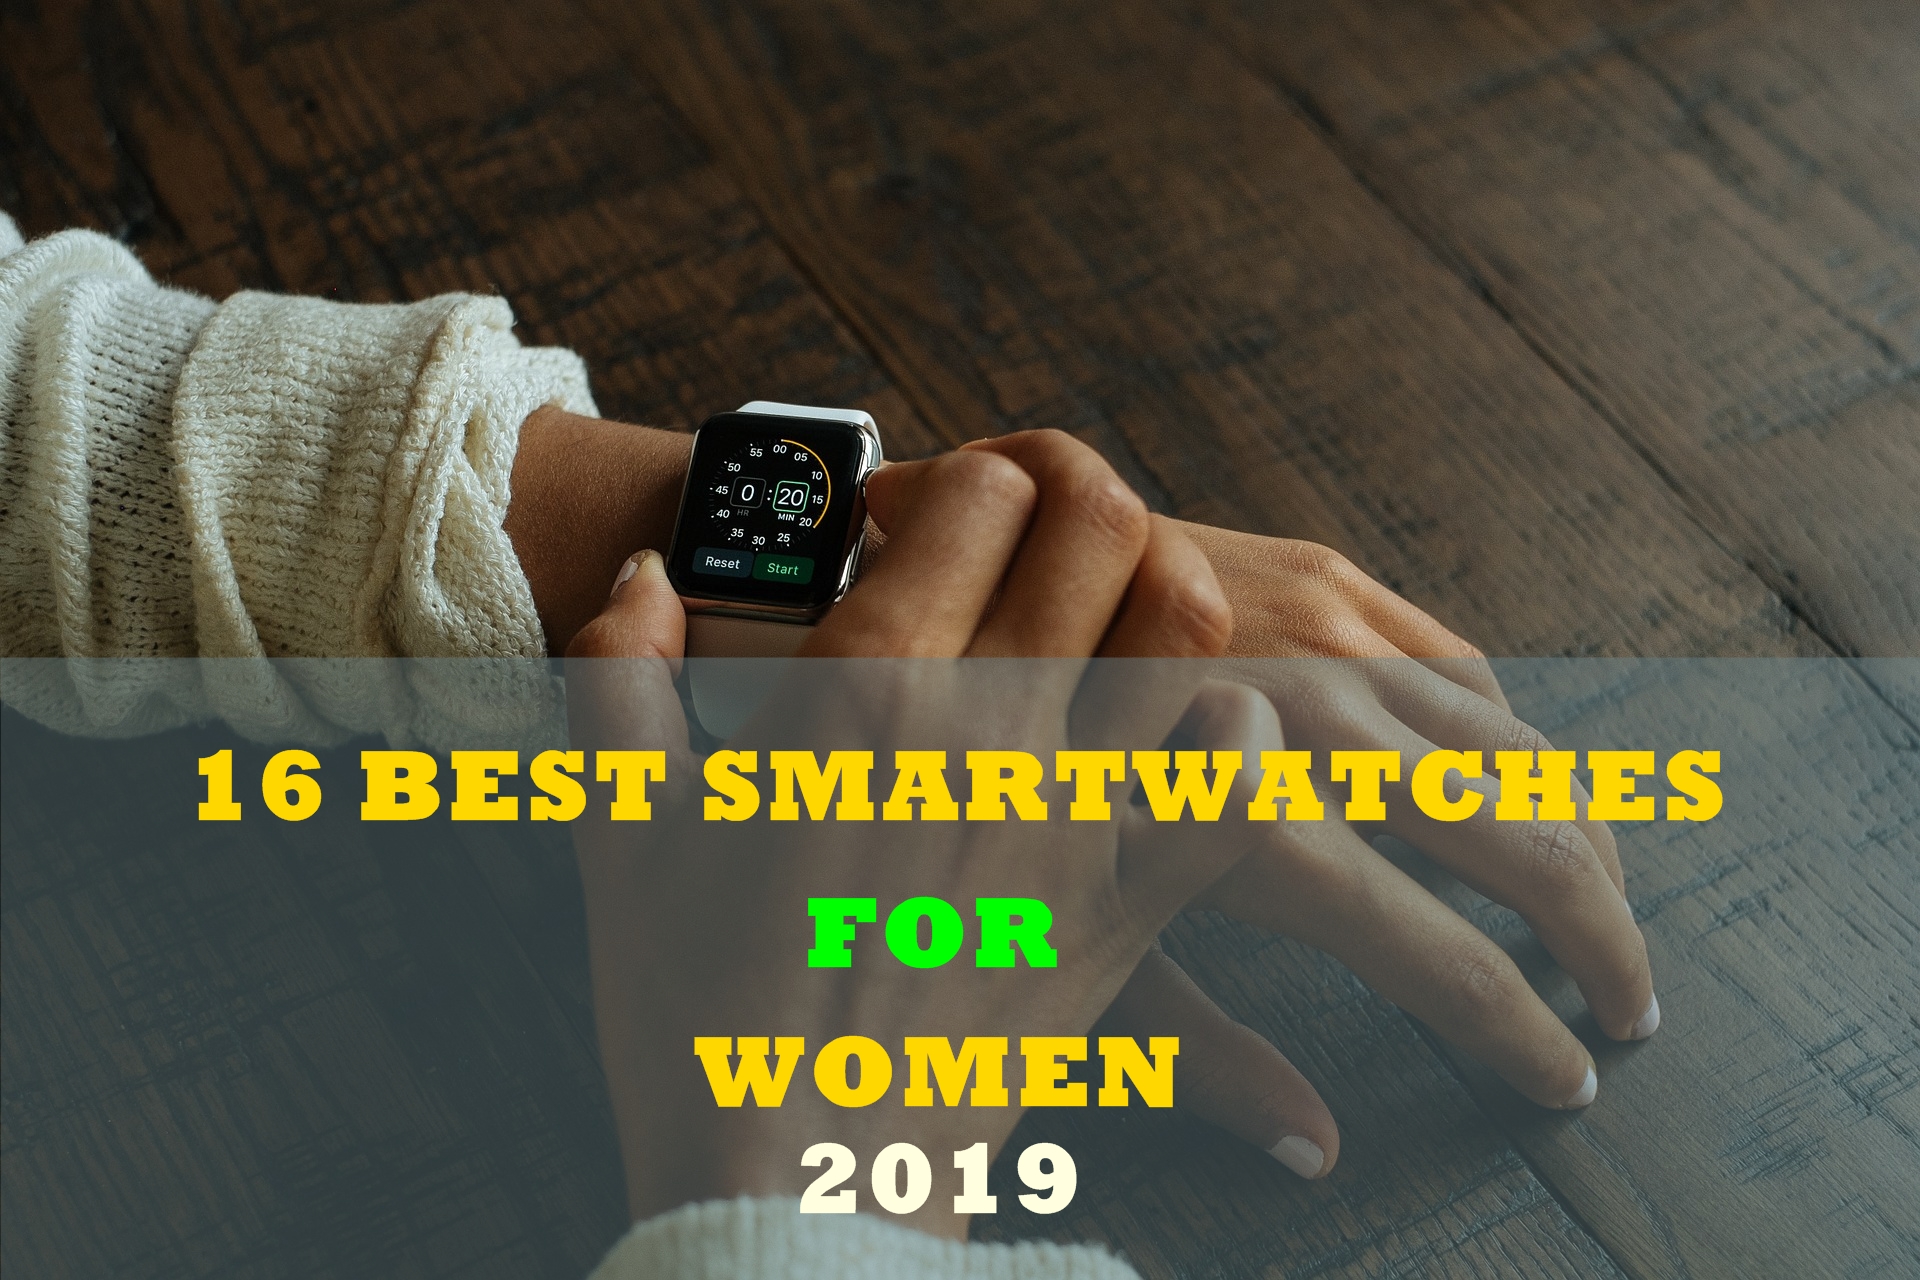 10 Best Smartwatches For Women - Buyer's Guide 2021 [Our Review]